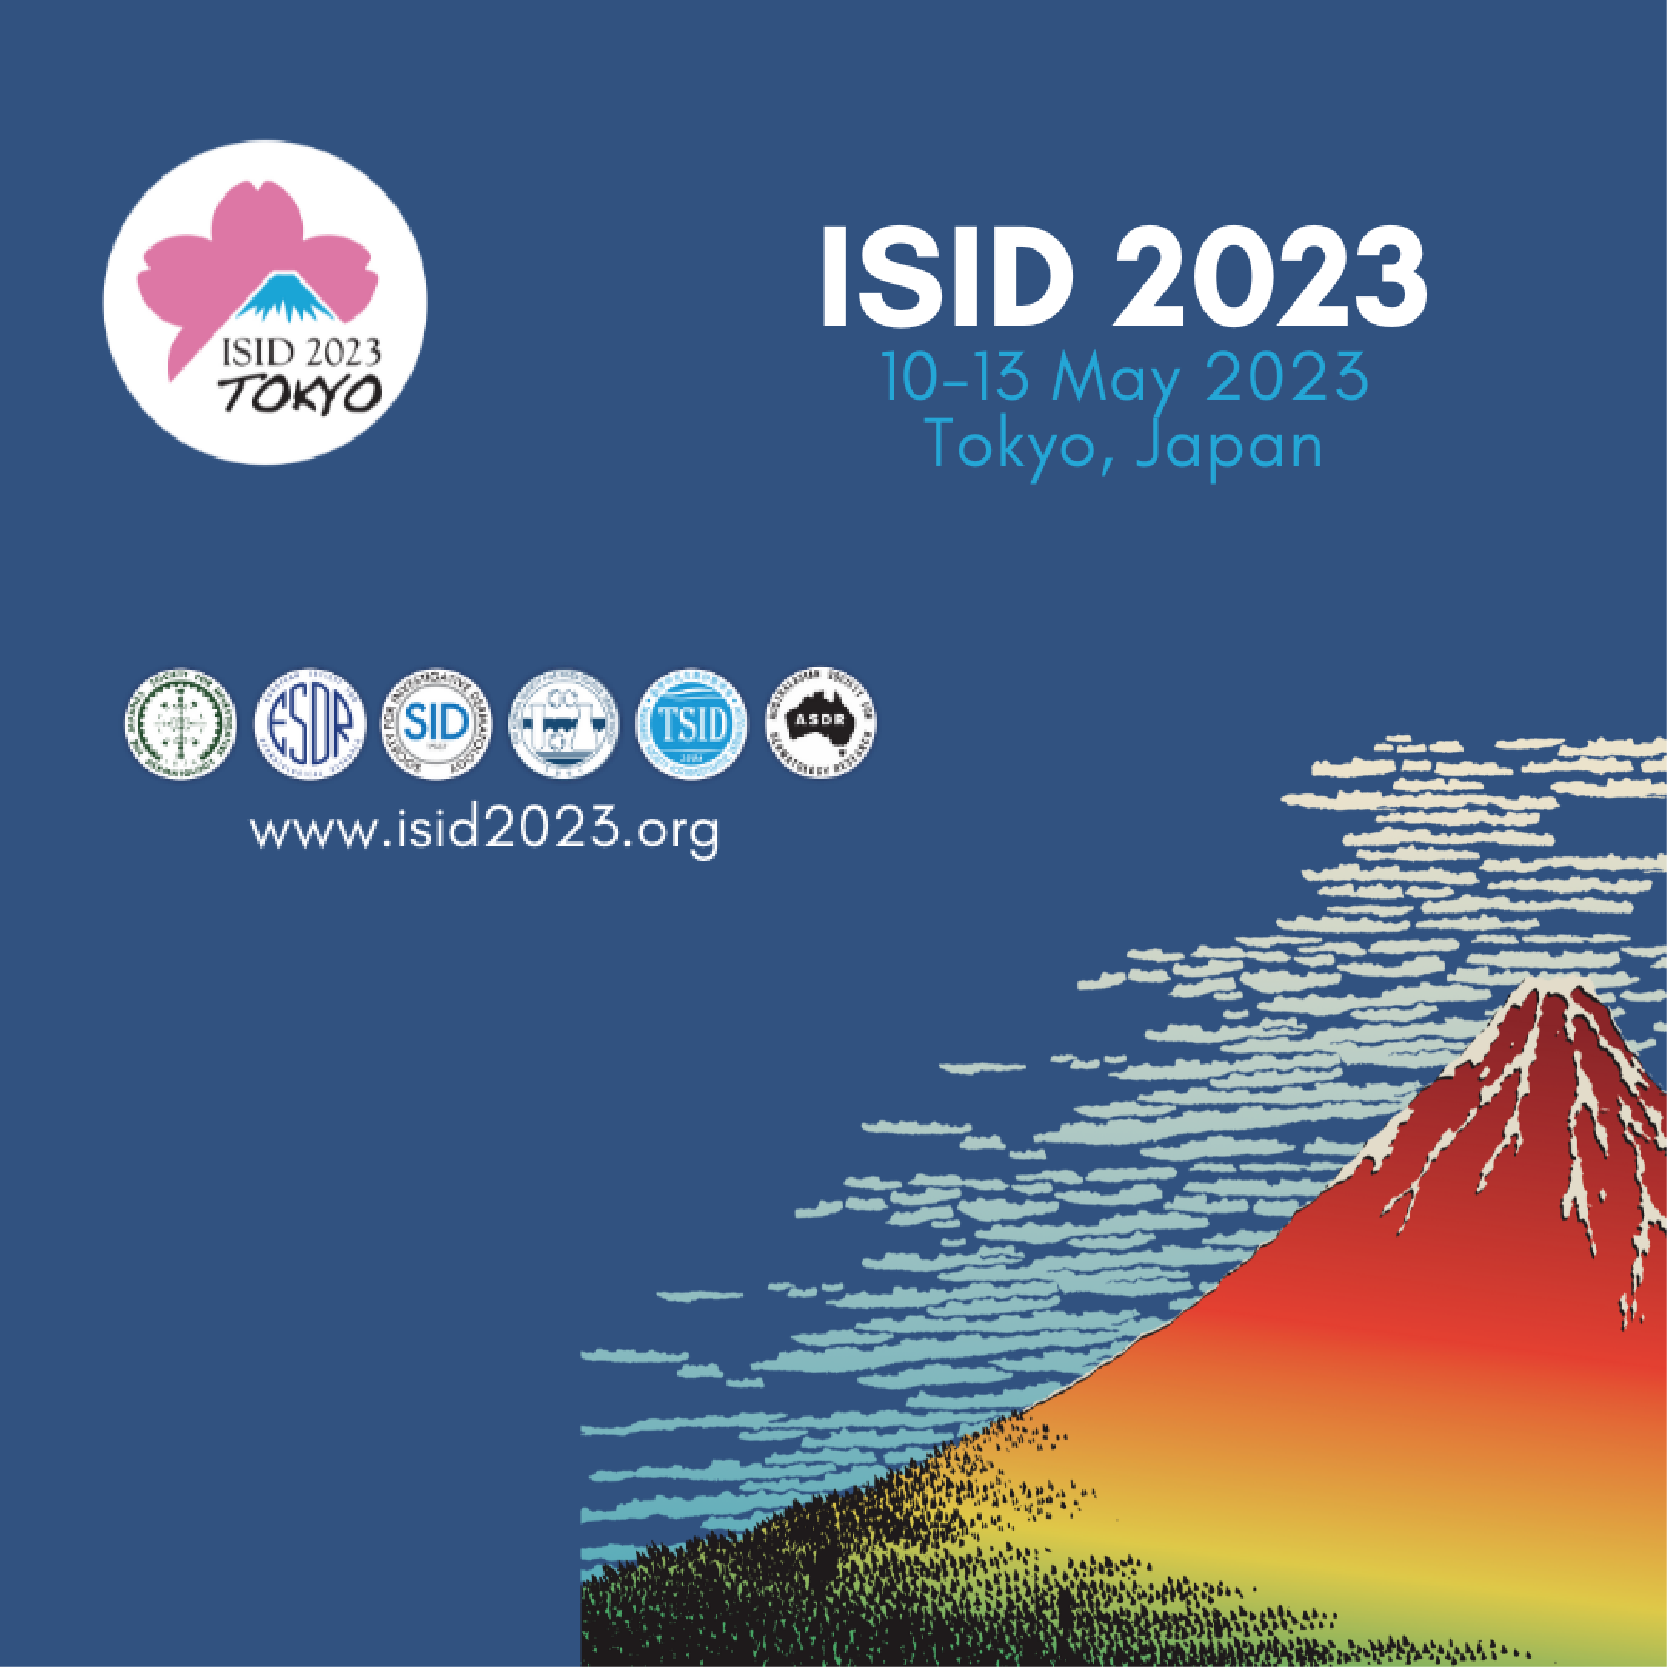 First International Societies For Investigative Dermatology Meeting - ISID 2023